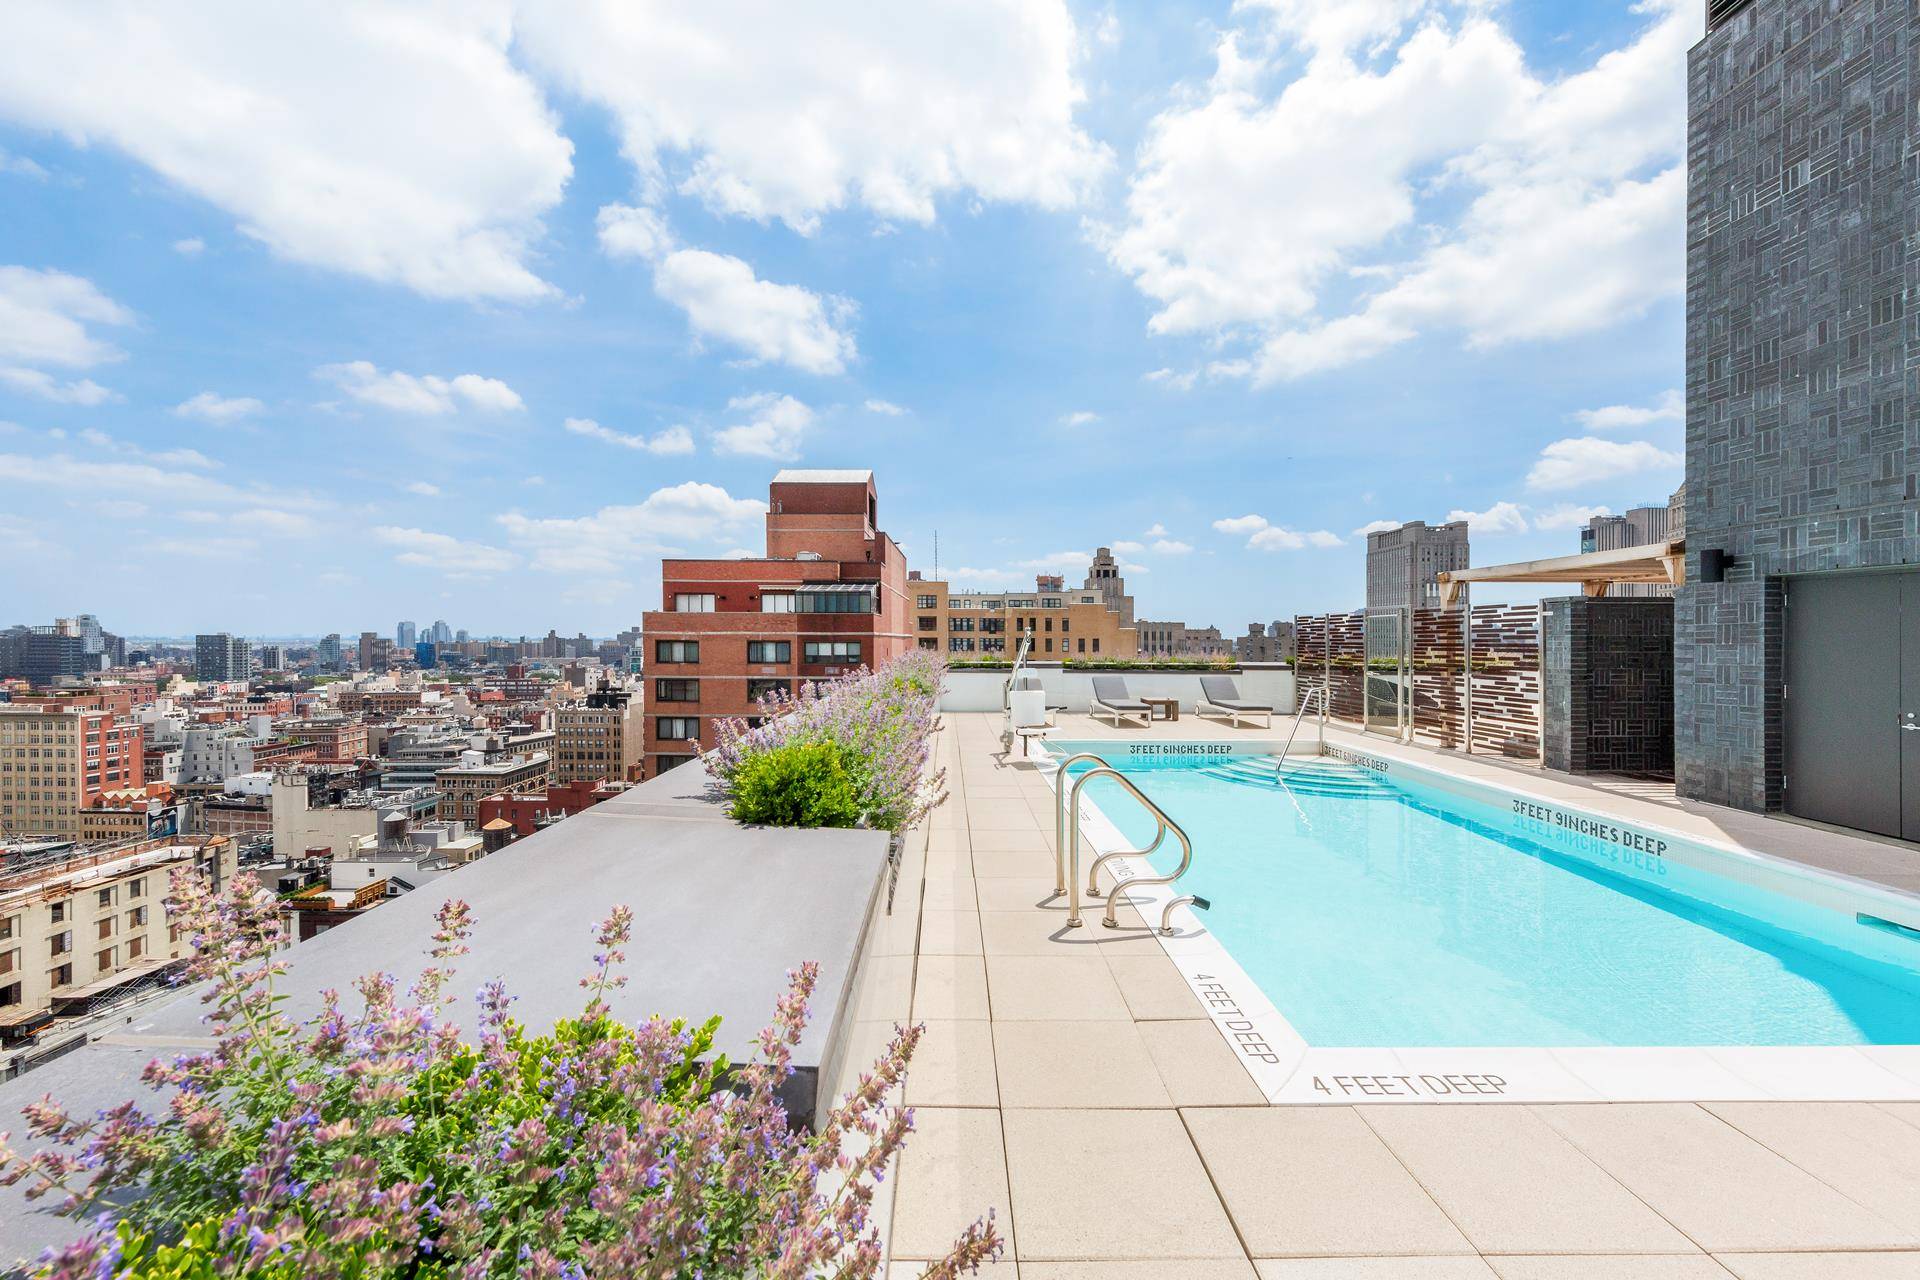 This beautiful two bedroom two and a half bathroom home cultivates luxury and is advantageously positioned in one of the best boutique buildings in thriving Tribeca.